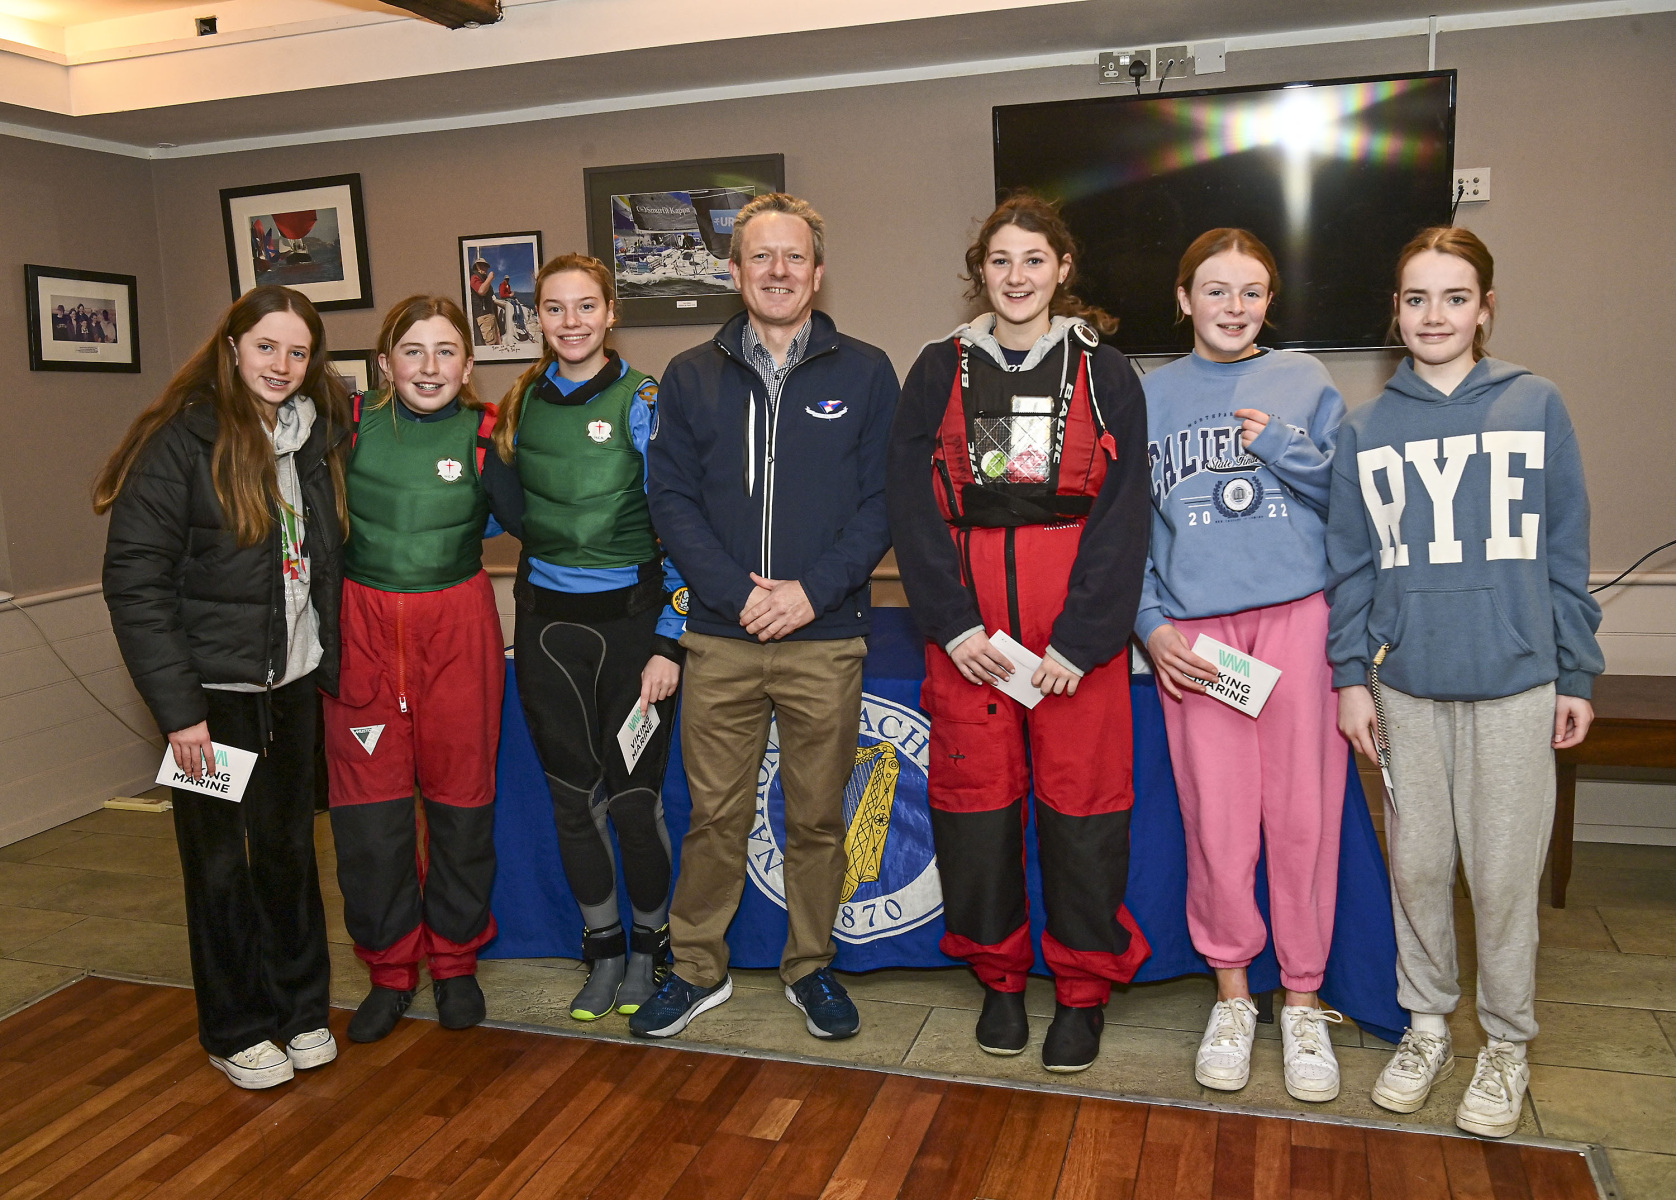 Third place Holy Child (3) Lucia Cullen, Zoe Hammond, Abigail Murphy, Commodore NYC Conor O’Regan, Juliete Murry, Zita Tempany, and Rachel Murdock. 

“The Leinster Schools Team Racing Championships 2023 sponsored by Viking Marine”
****NO Reproduction Fee ******
Pic © Michael Chester
0878072295
info@chester.ie